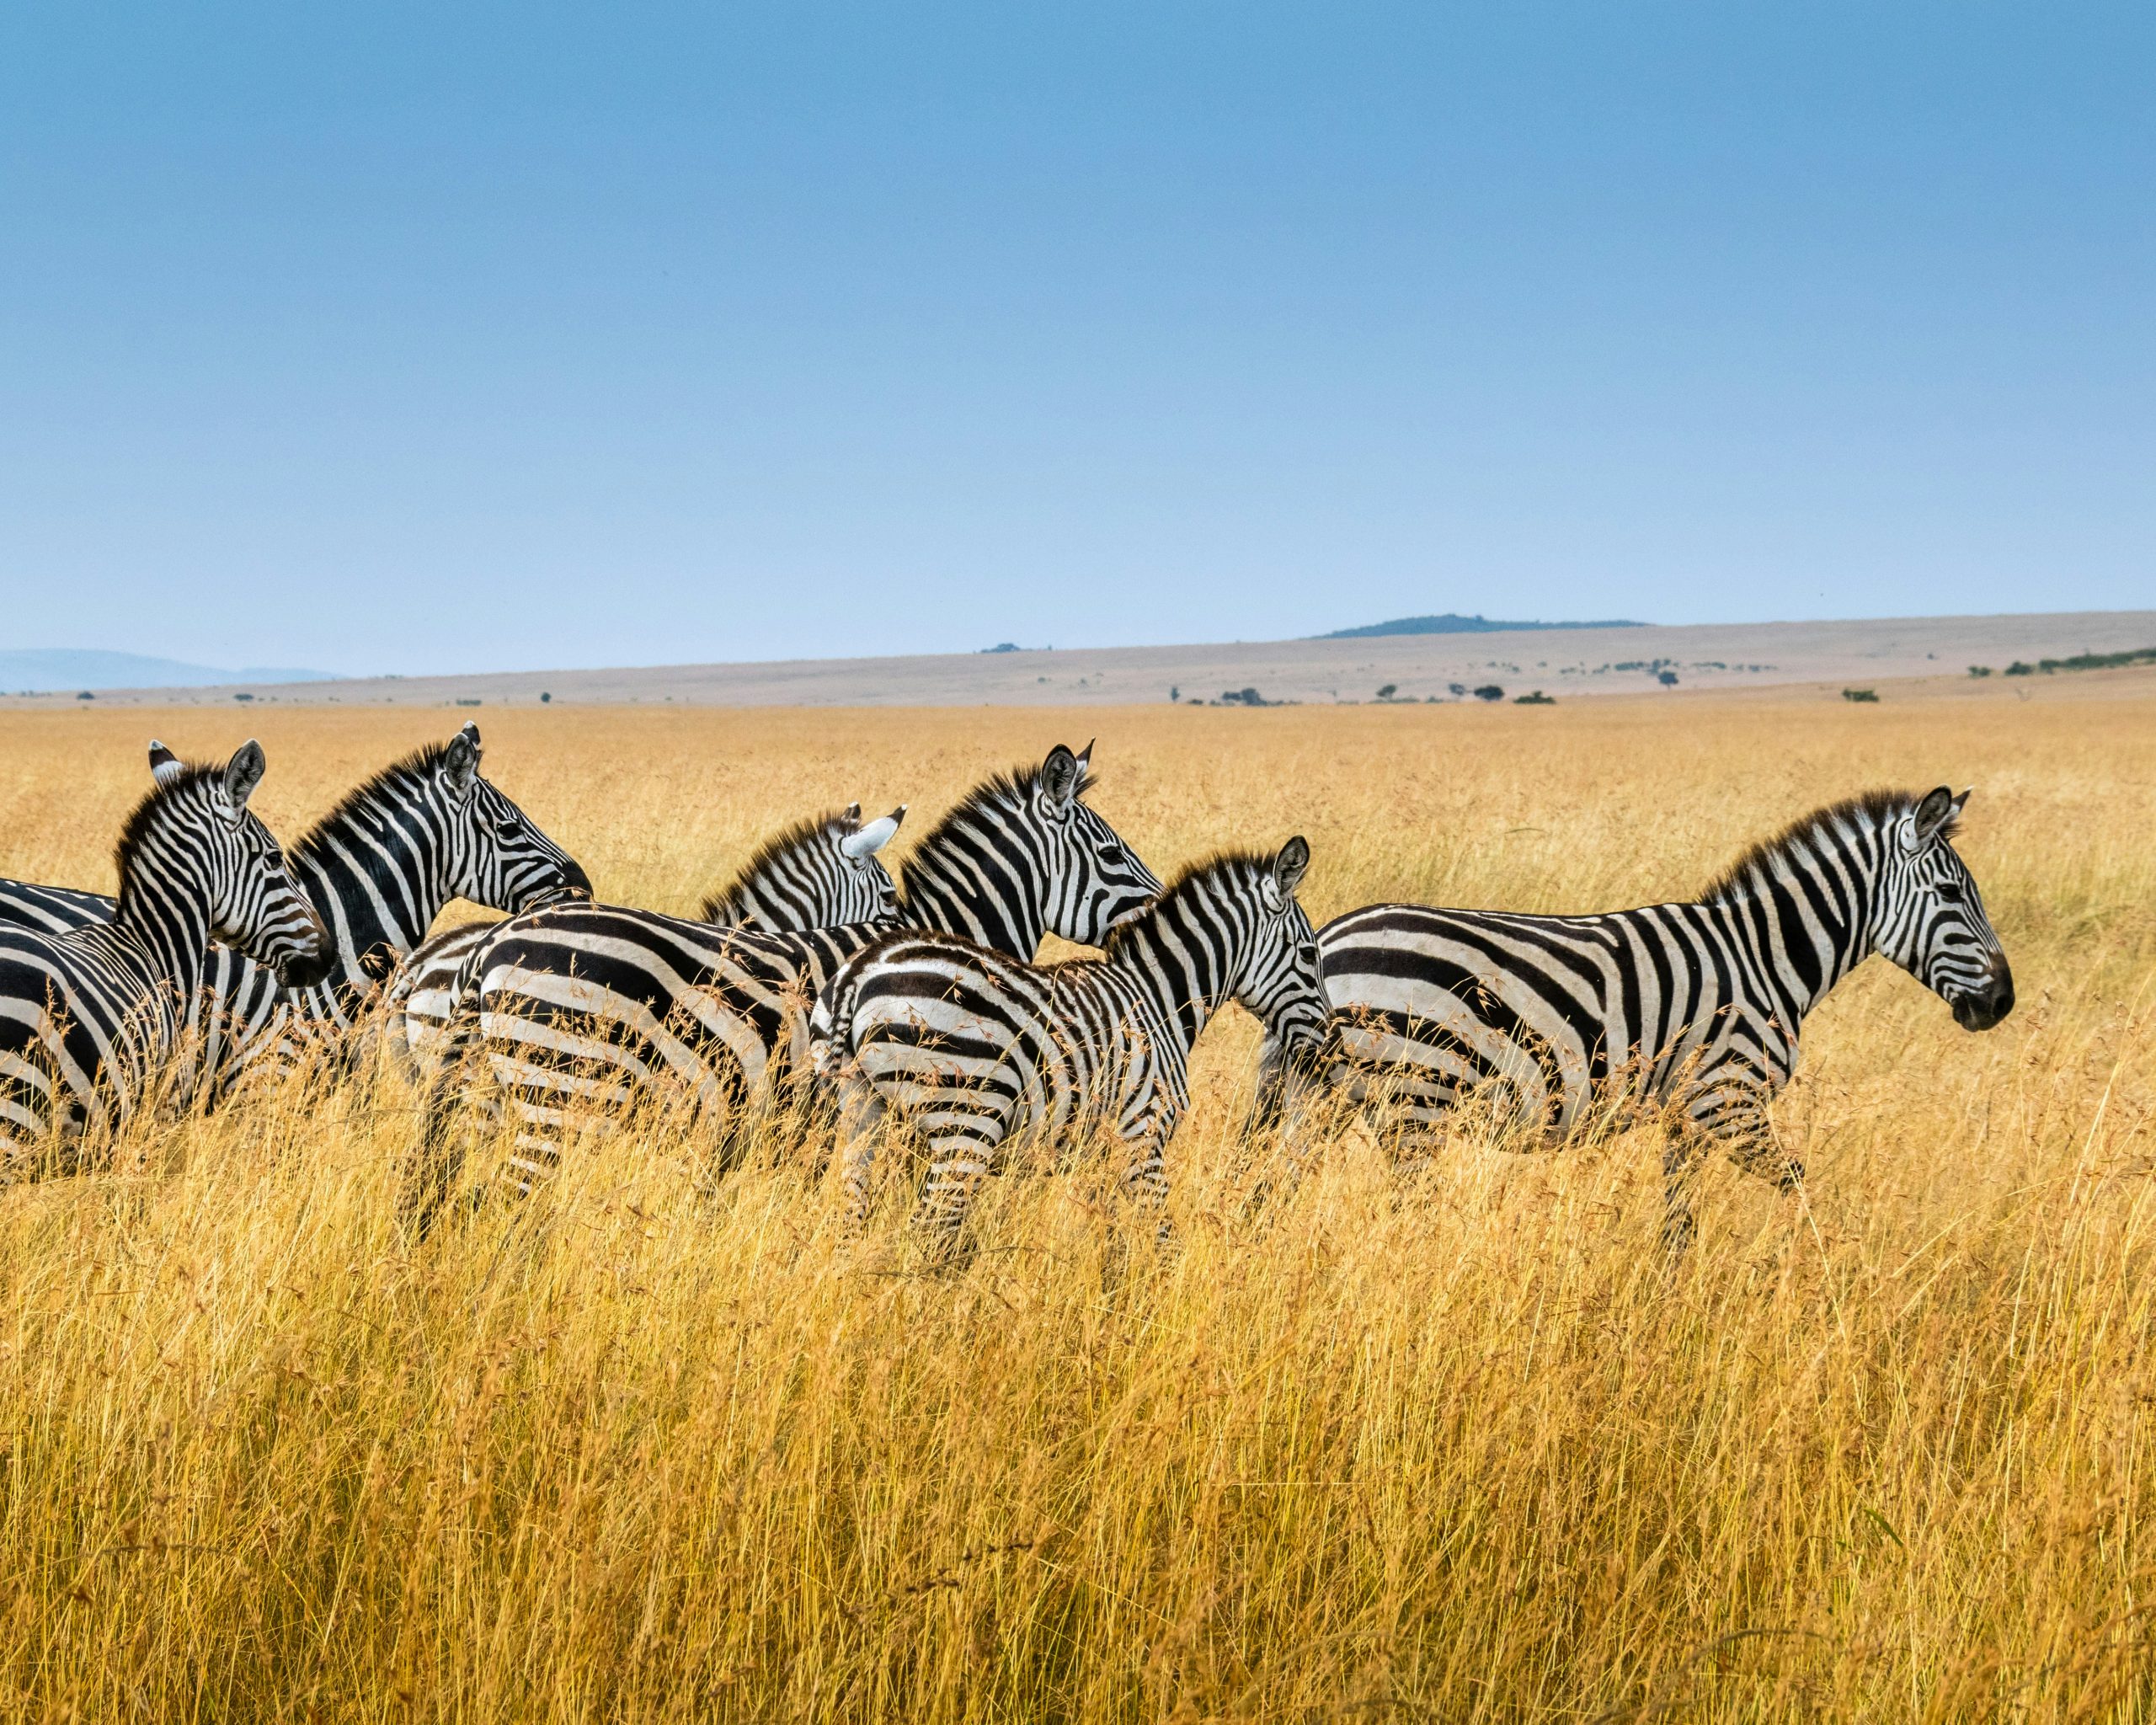 explore the wonders of wildlife on a thrilling safari adventure in the heart of africa. witness majestic animals in their natural habitat and immerse yourself in the beauty of the african savannah.